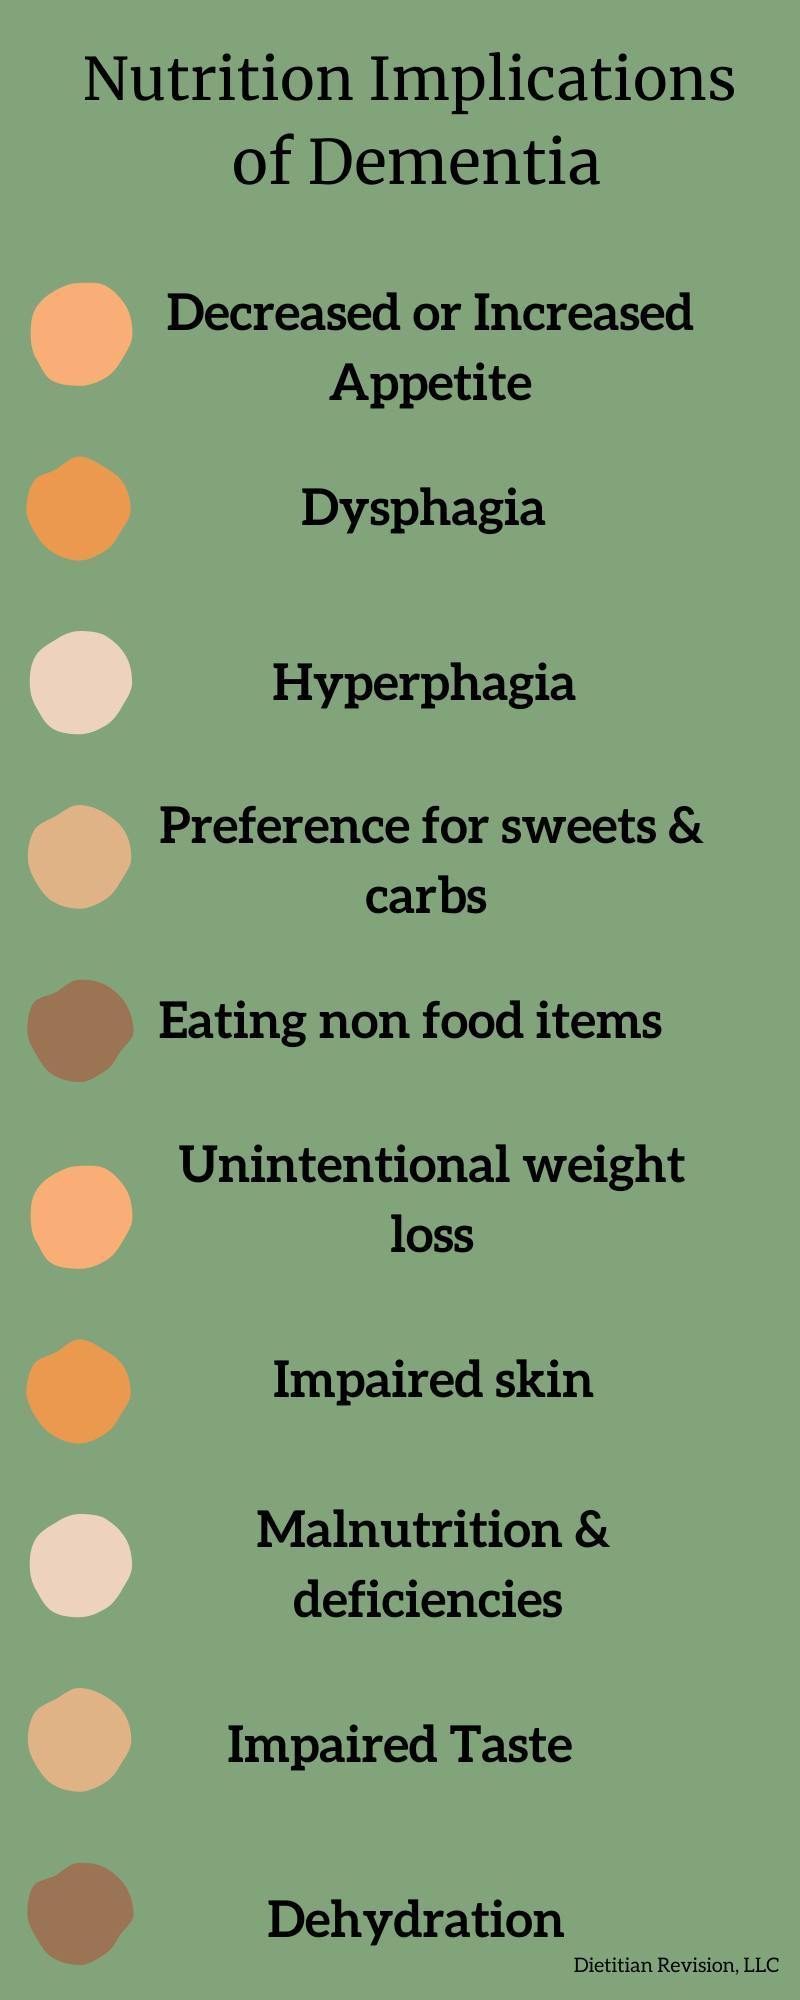 List of nutrition implications of dementia: decreased or increased appetite, dysphagia, hyperphagia, preference for sweets & carbs, eating non food items, unintentional weight loss, impaired skin, malnutrition & deficiencies, impaired taste, dehydration.